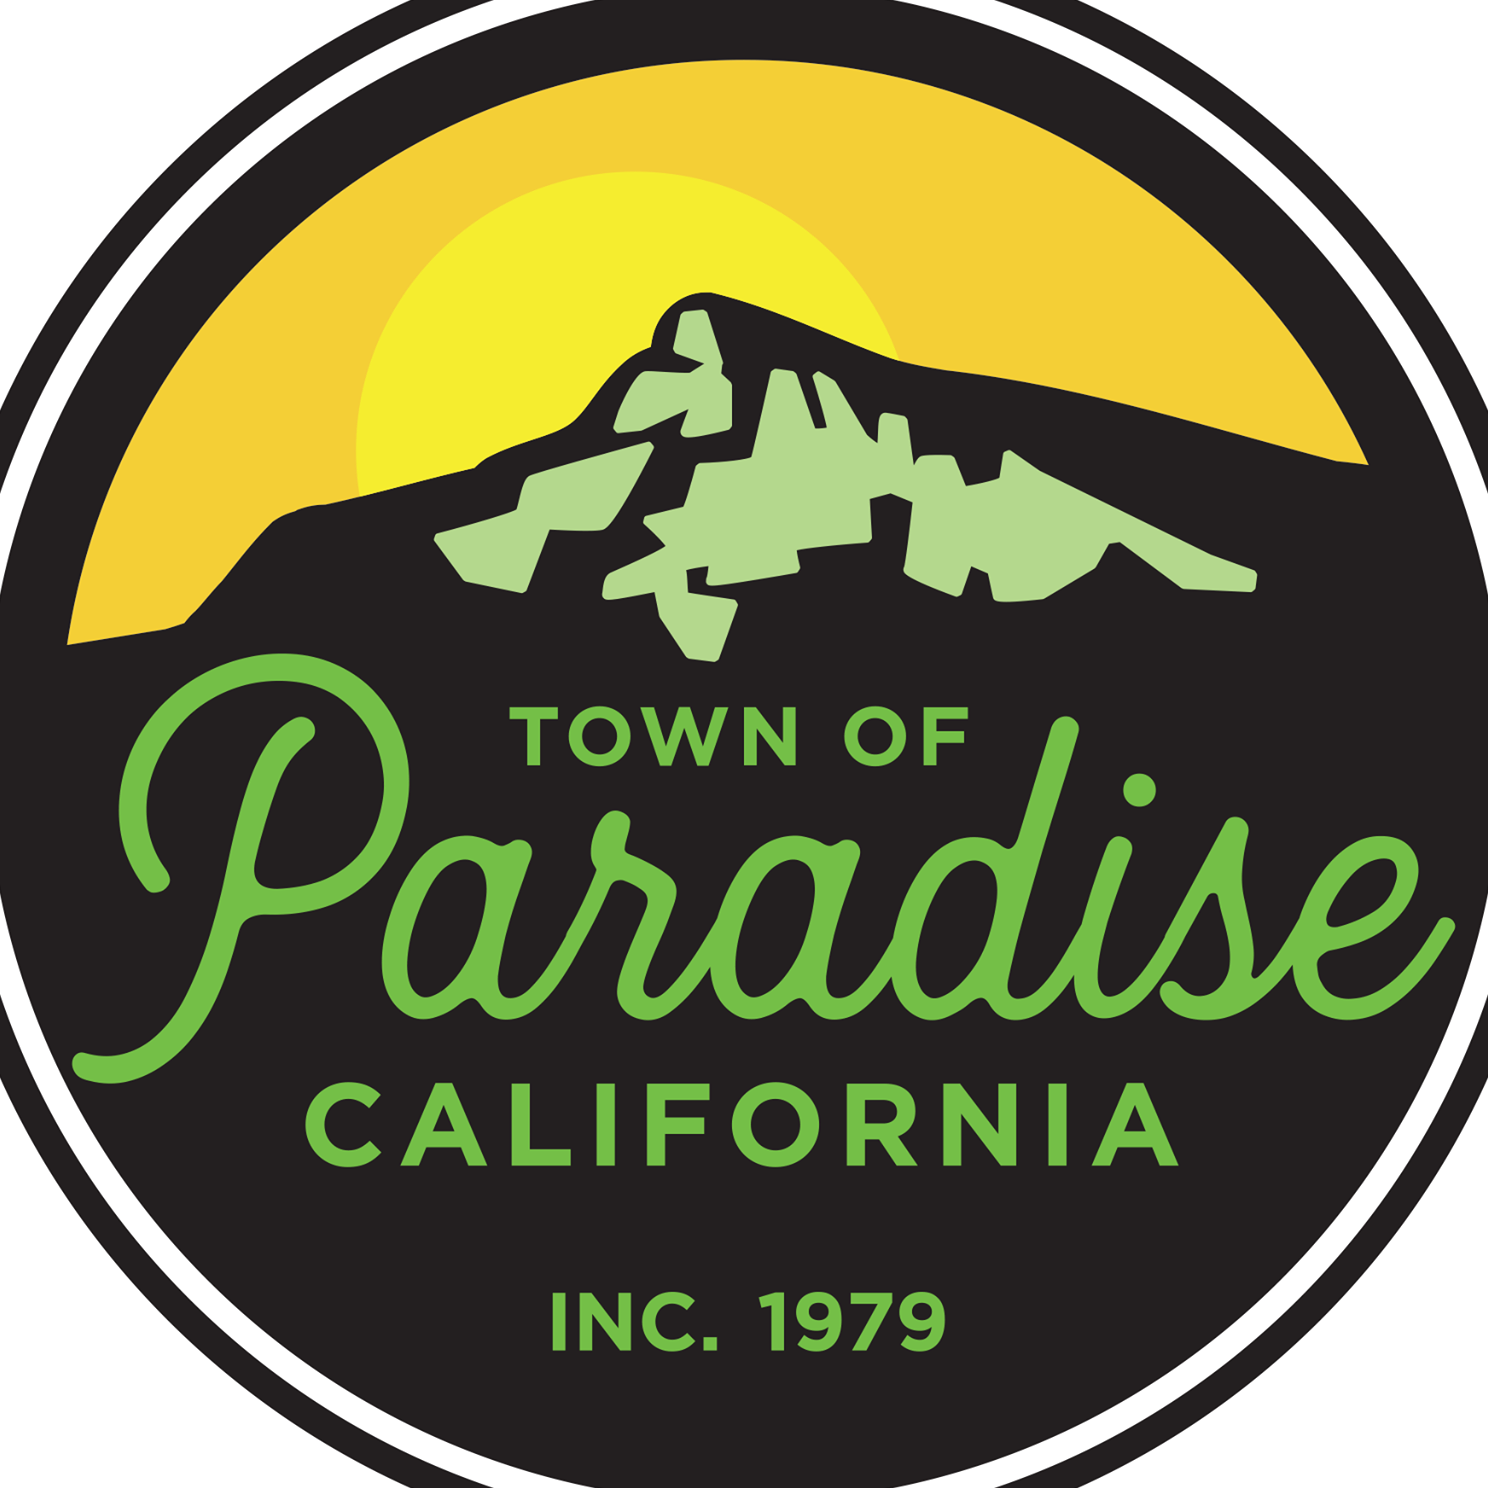 The Town of Paradise